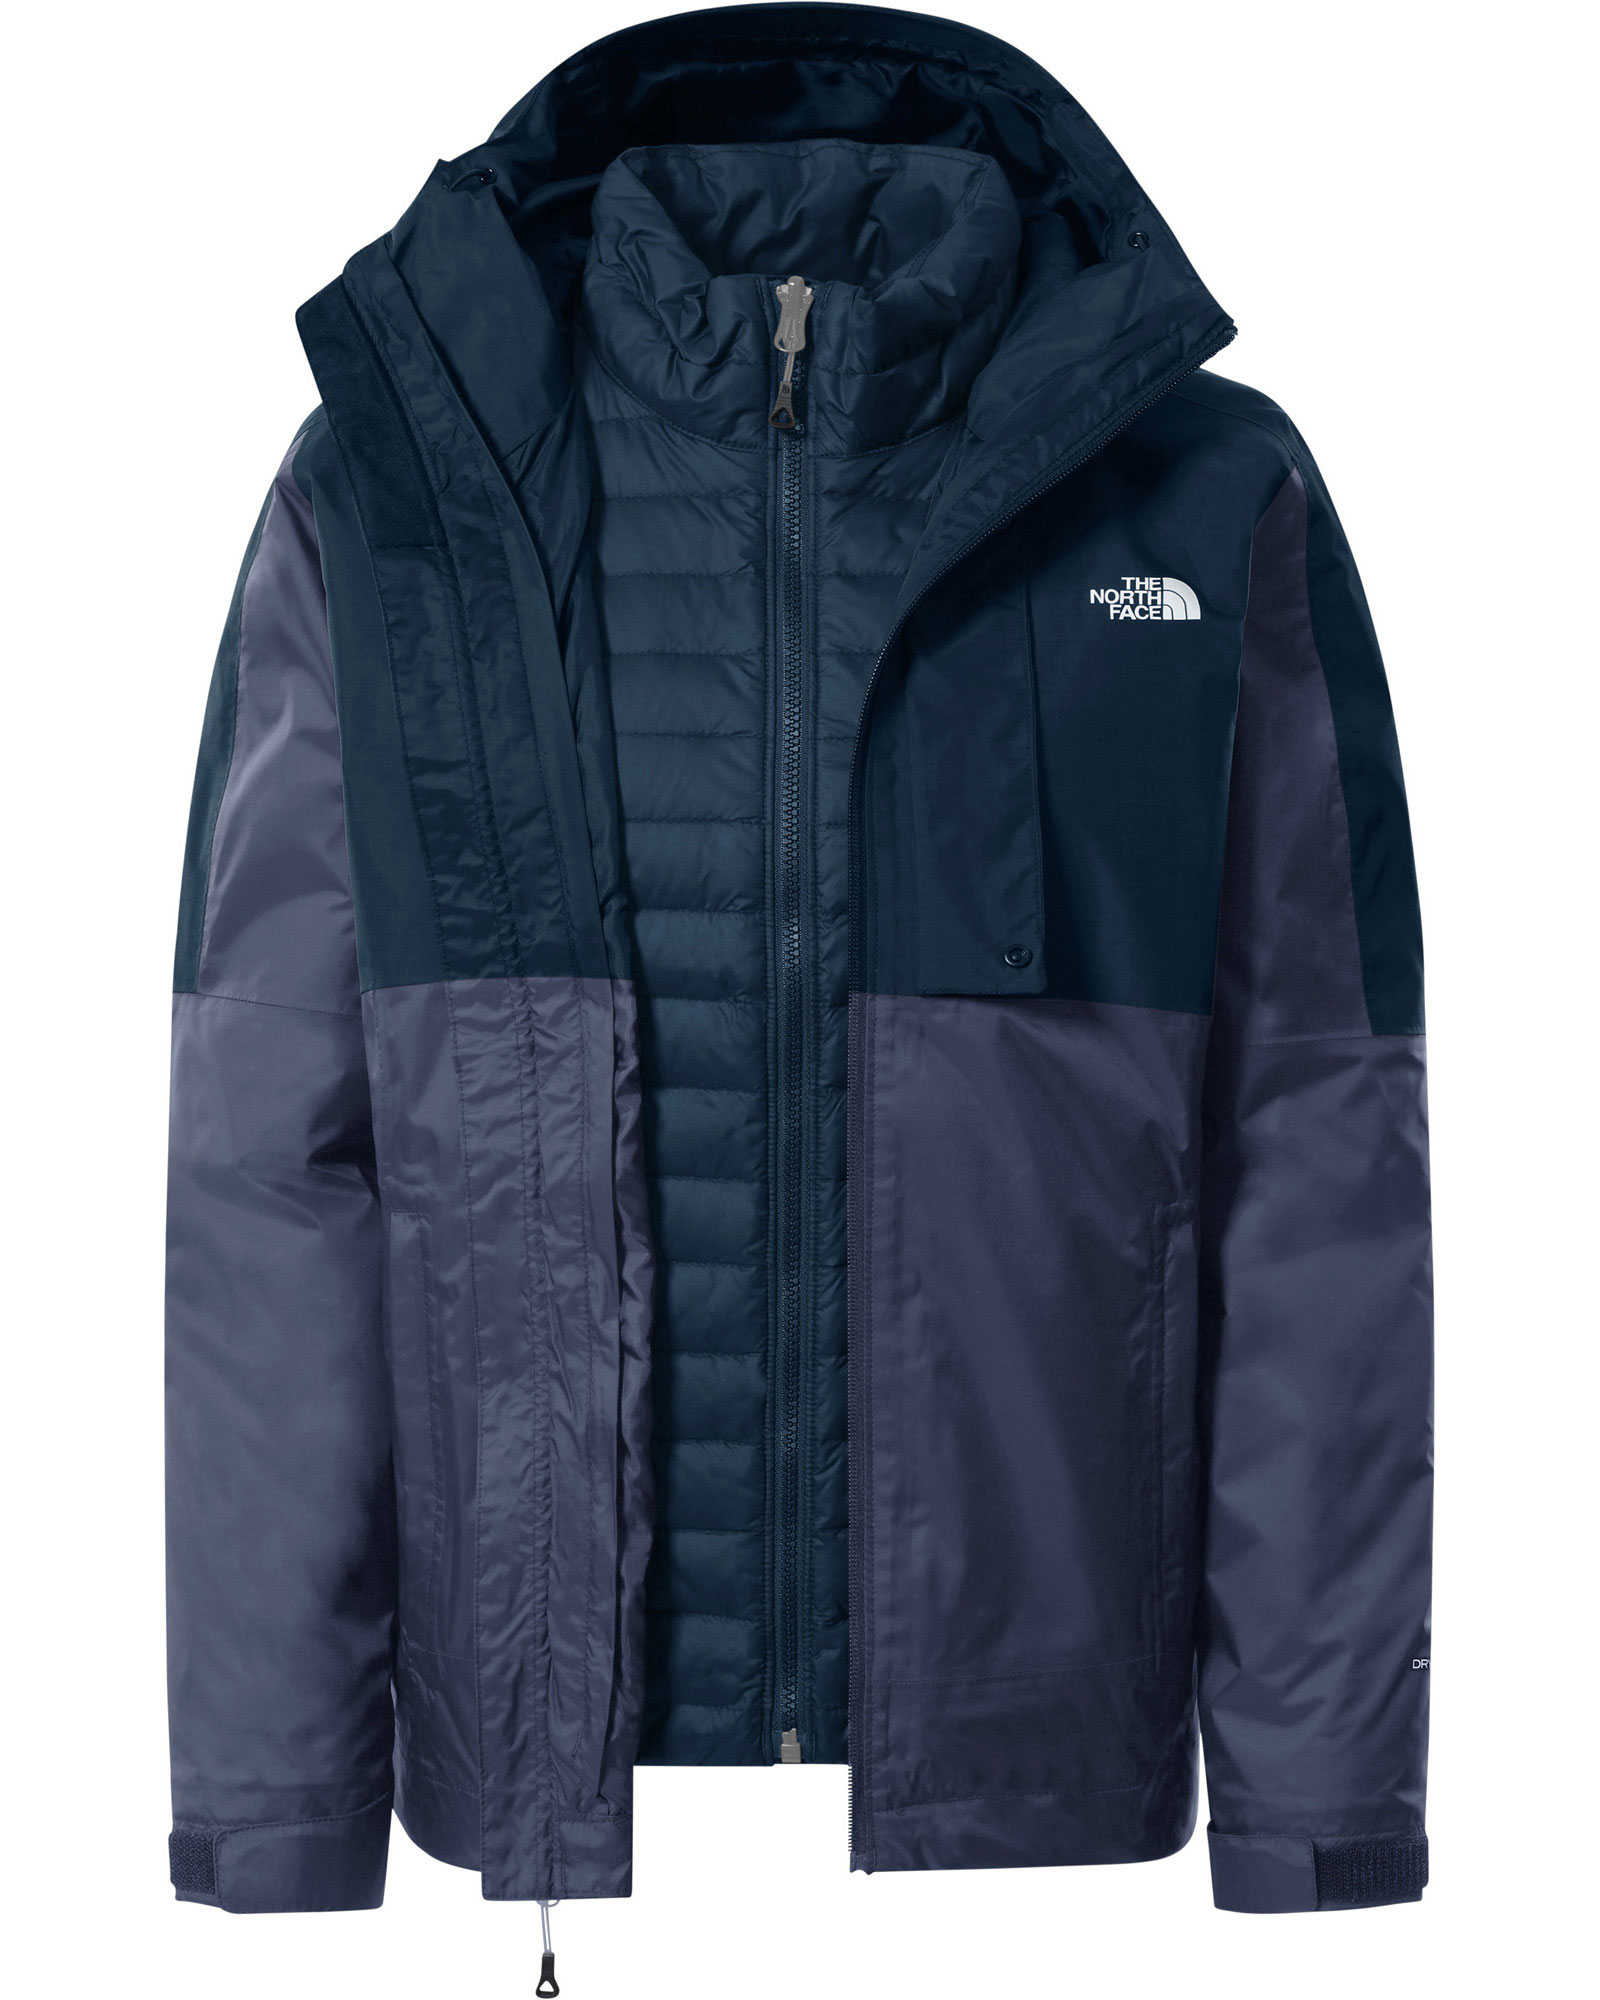 The North Face Down Insulated Triclimate Women’s Parka Jacket - Shady Blue S